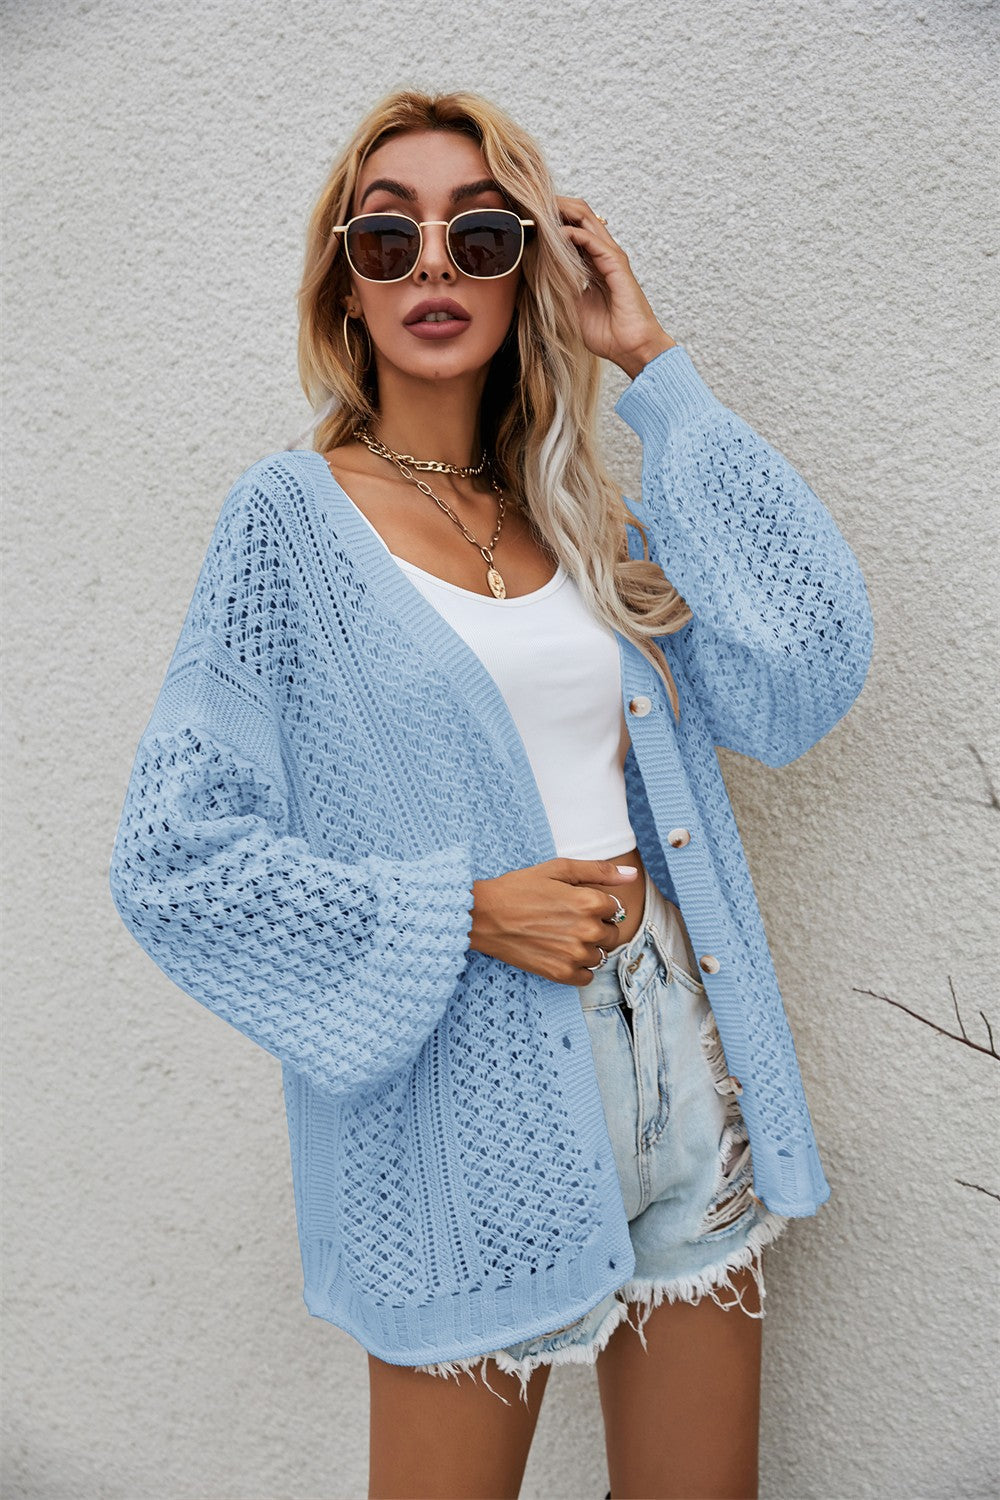 Openwork V-Neck Dropped Shoulder Cardigan - Women’s Clothing & Accessories - Shirts & Tops - 11 - 2024